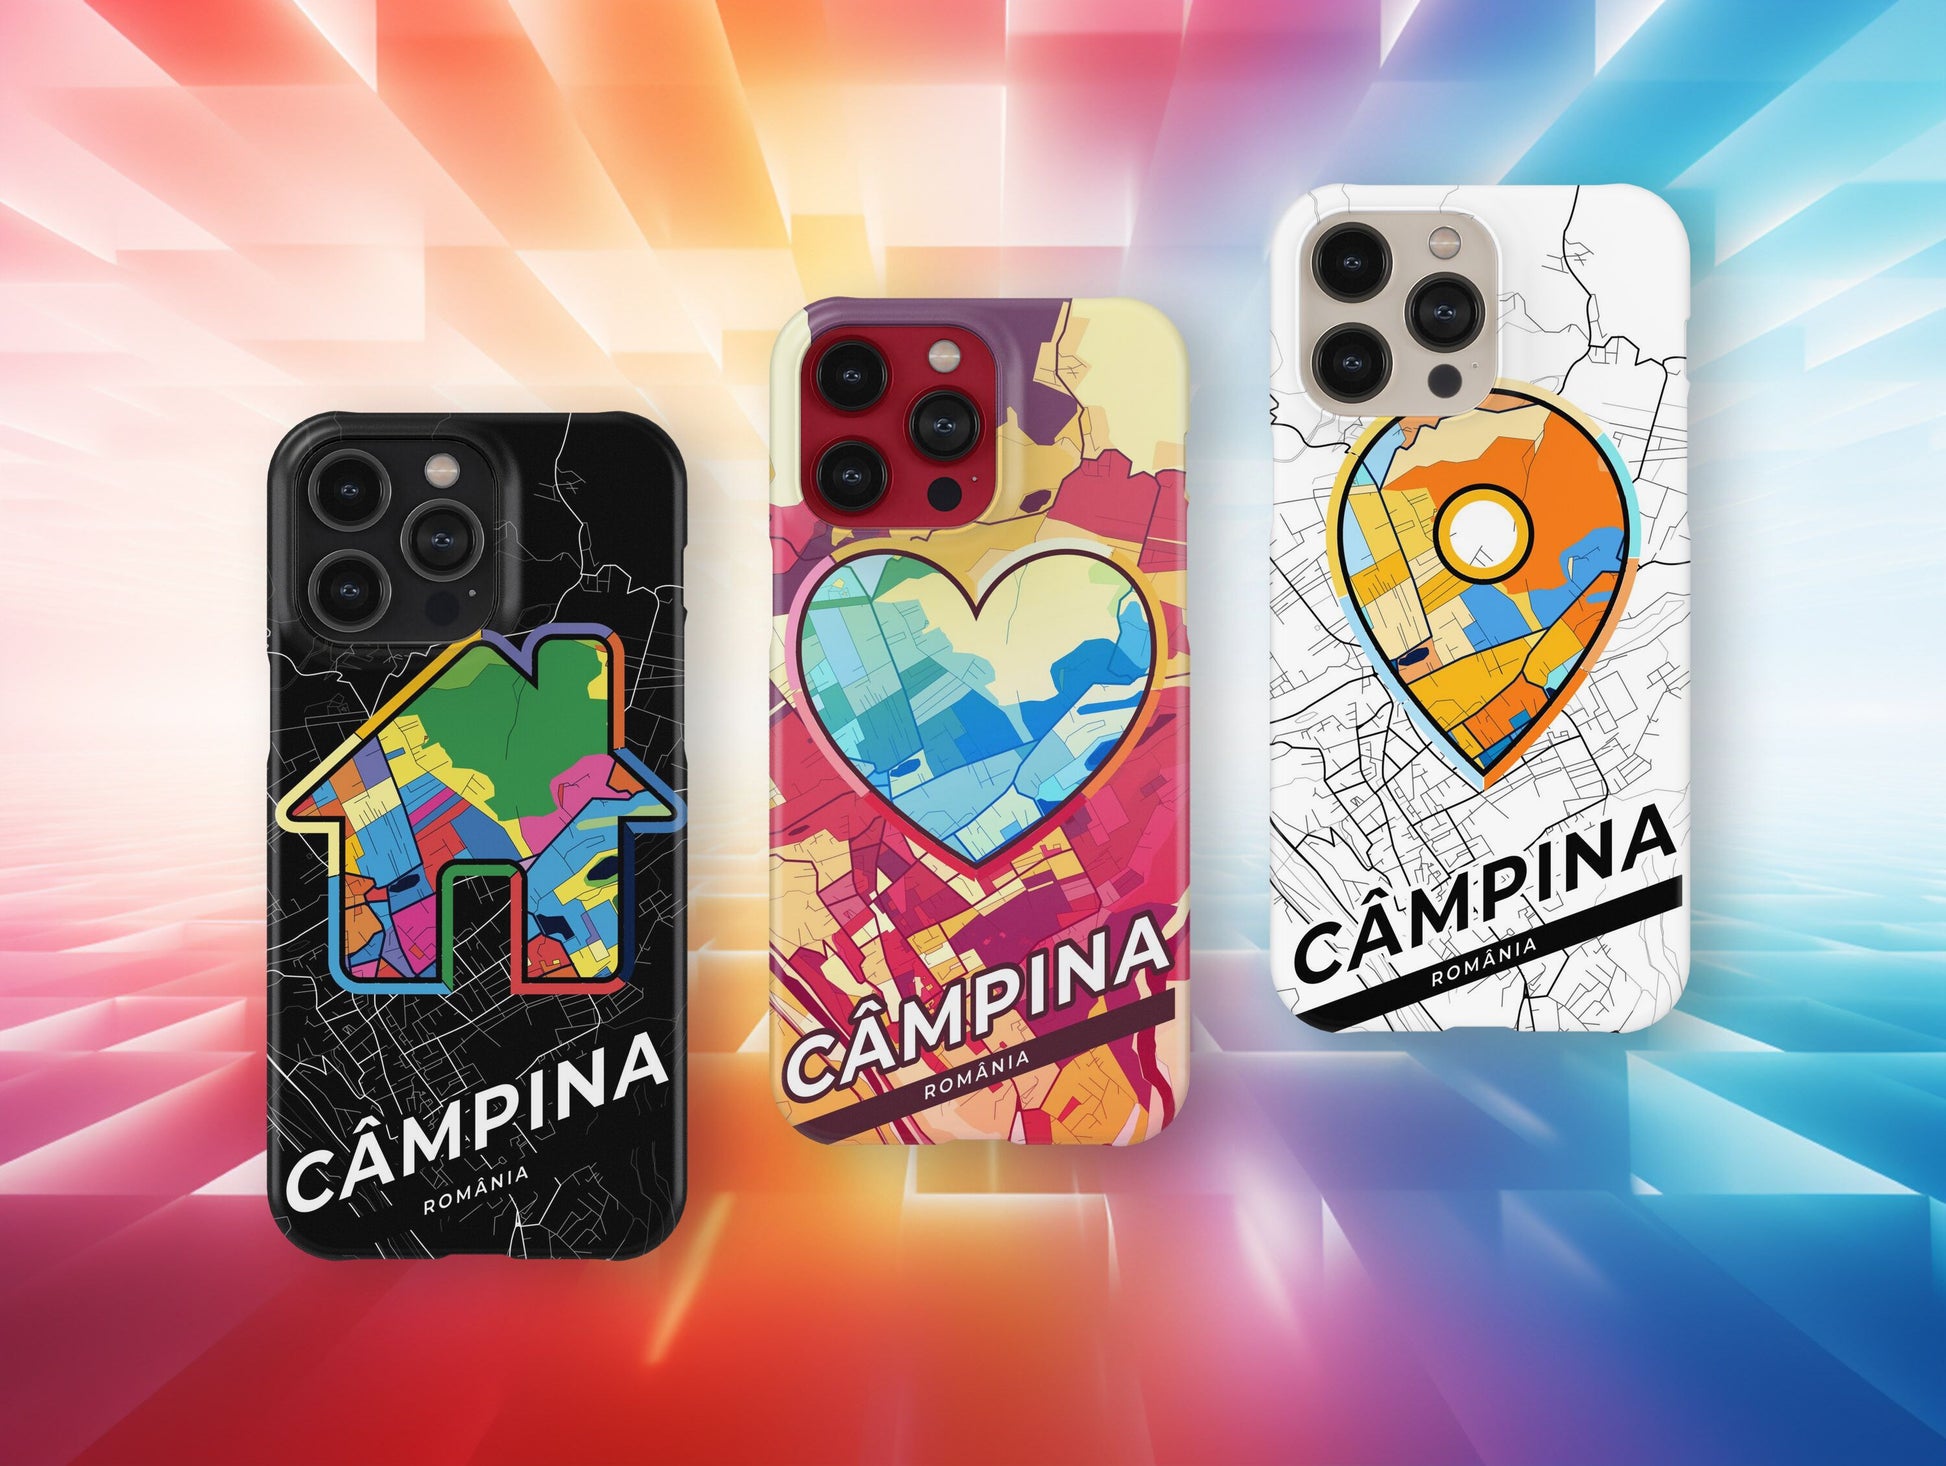 Câmpina Romania slim phone case with colorful icon. Birthday, wedding or housewarming gift. Couple match cases.